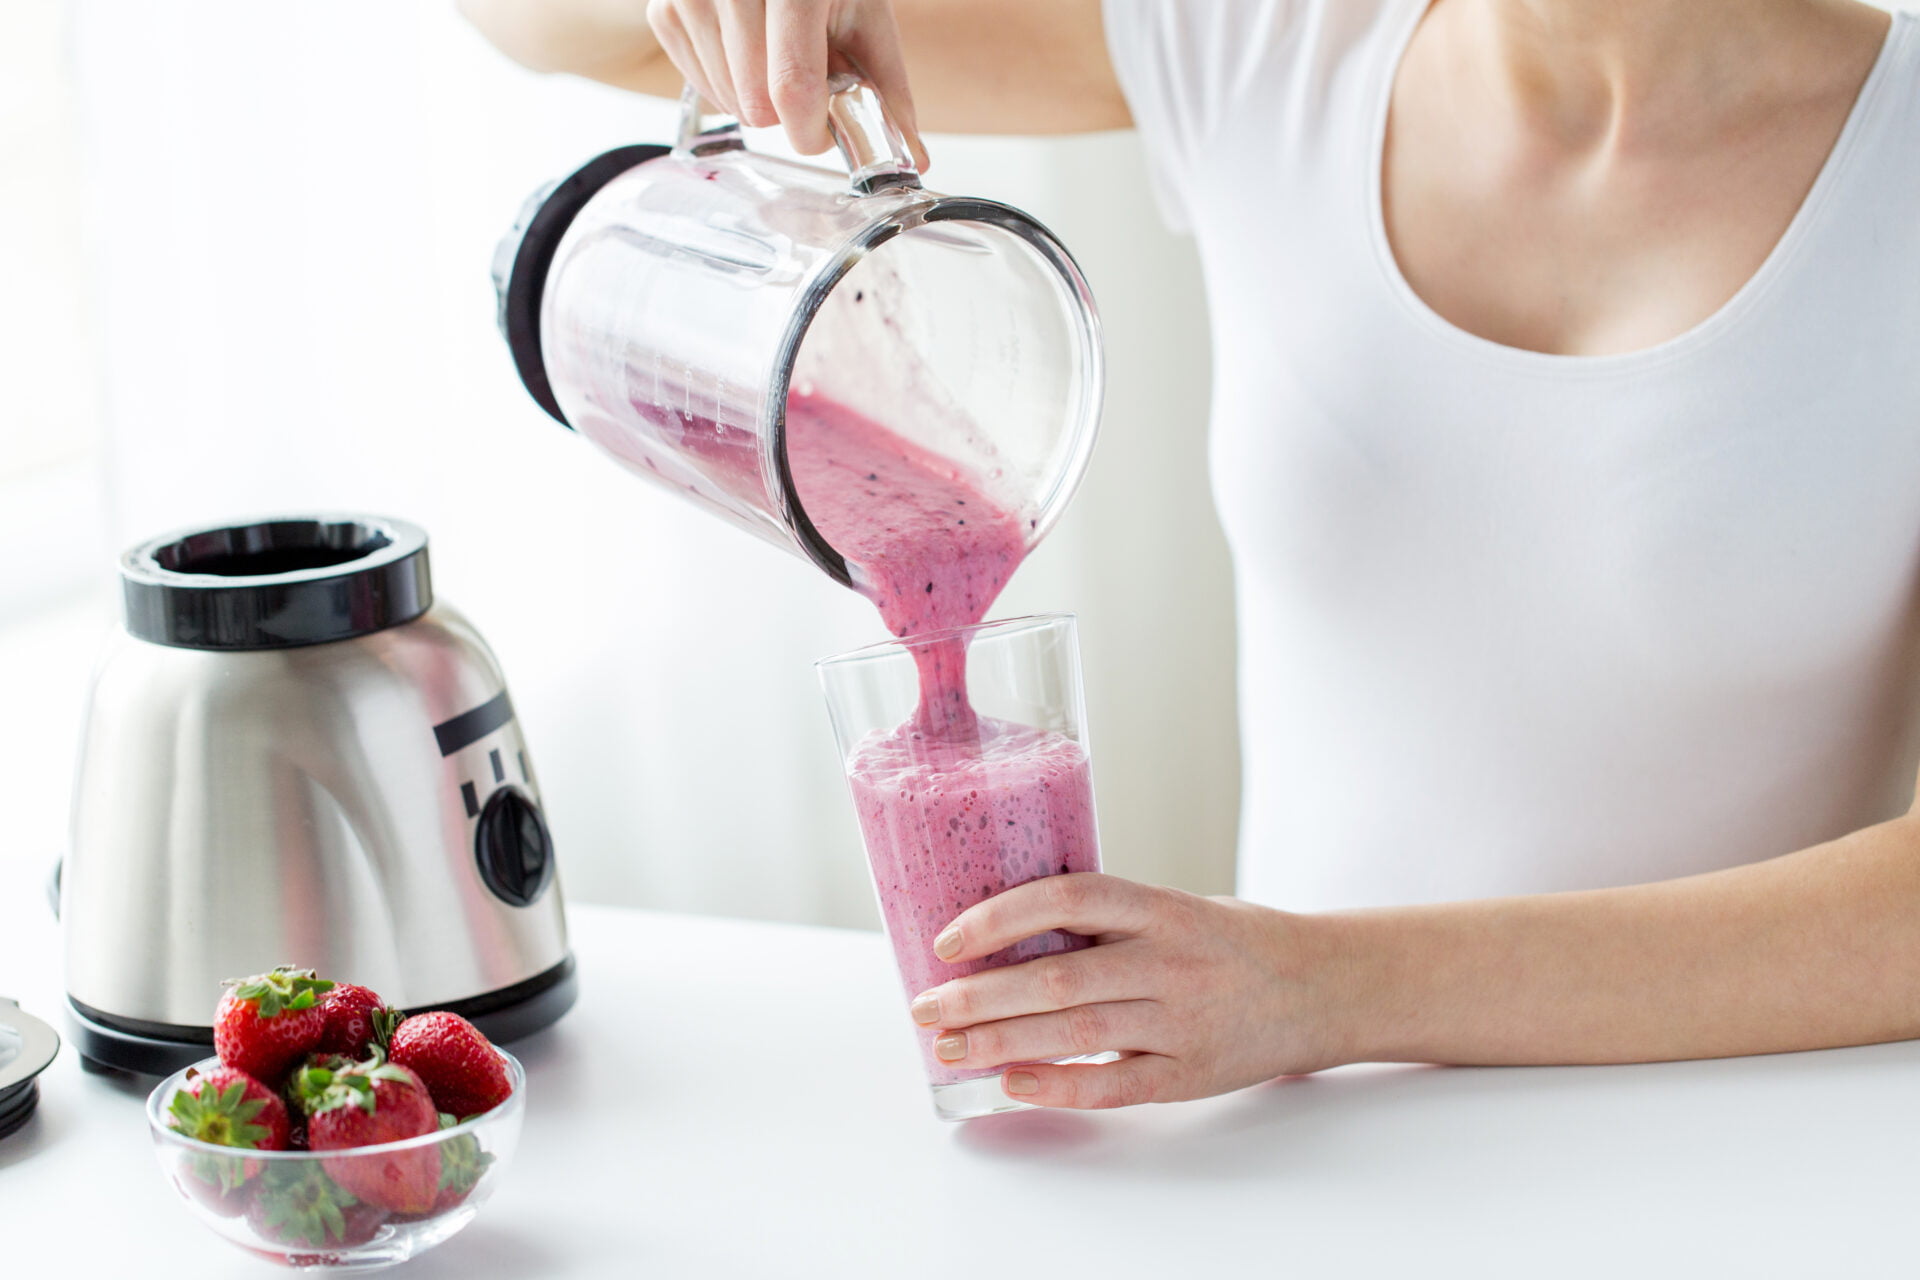 https://www.mamavation.com/wp-content/uploads/2022/09/blenders-with-the-safest-bpa-free-food-contact-surfaces.jpg